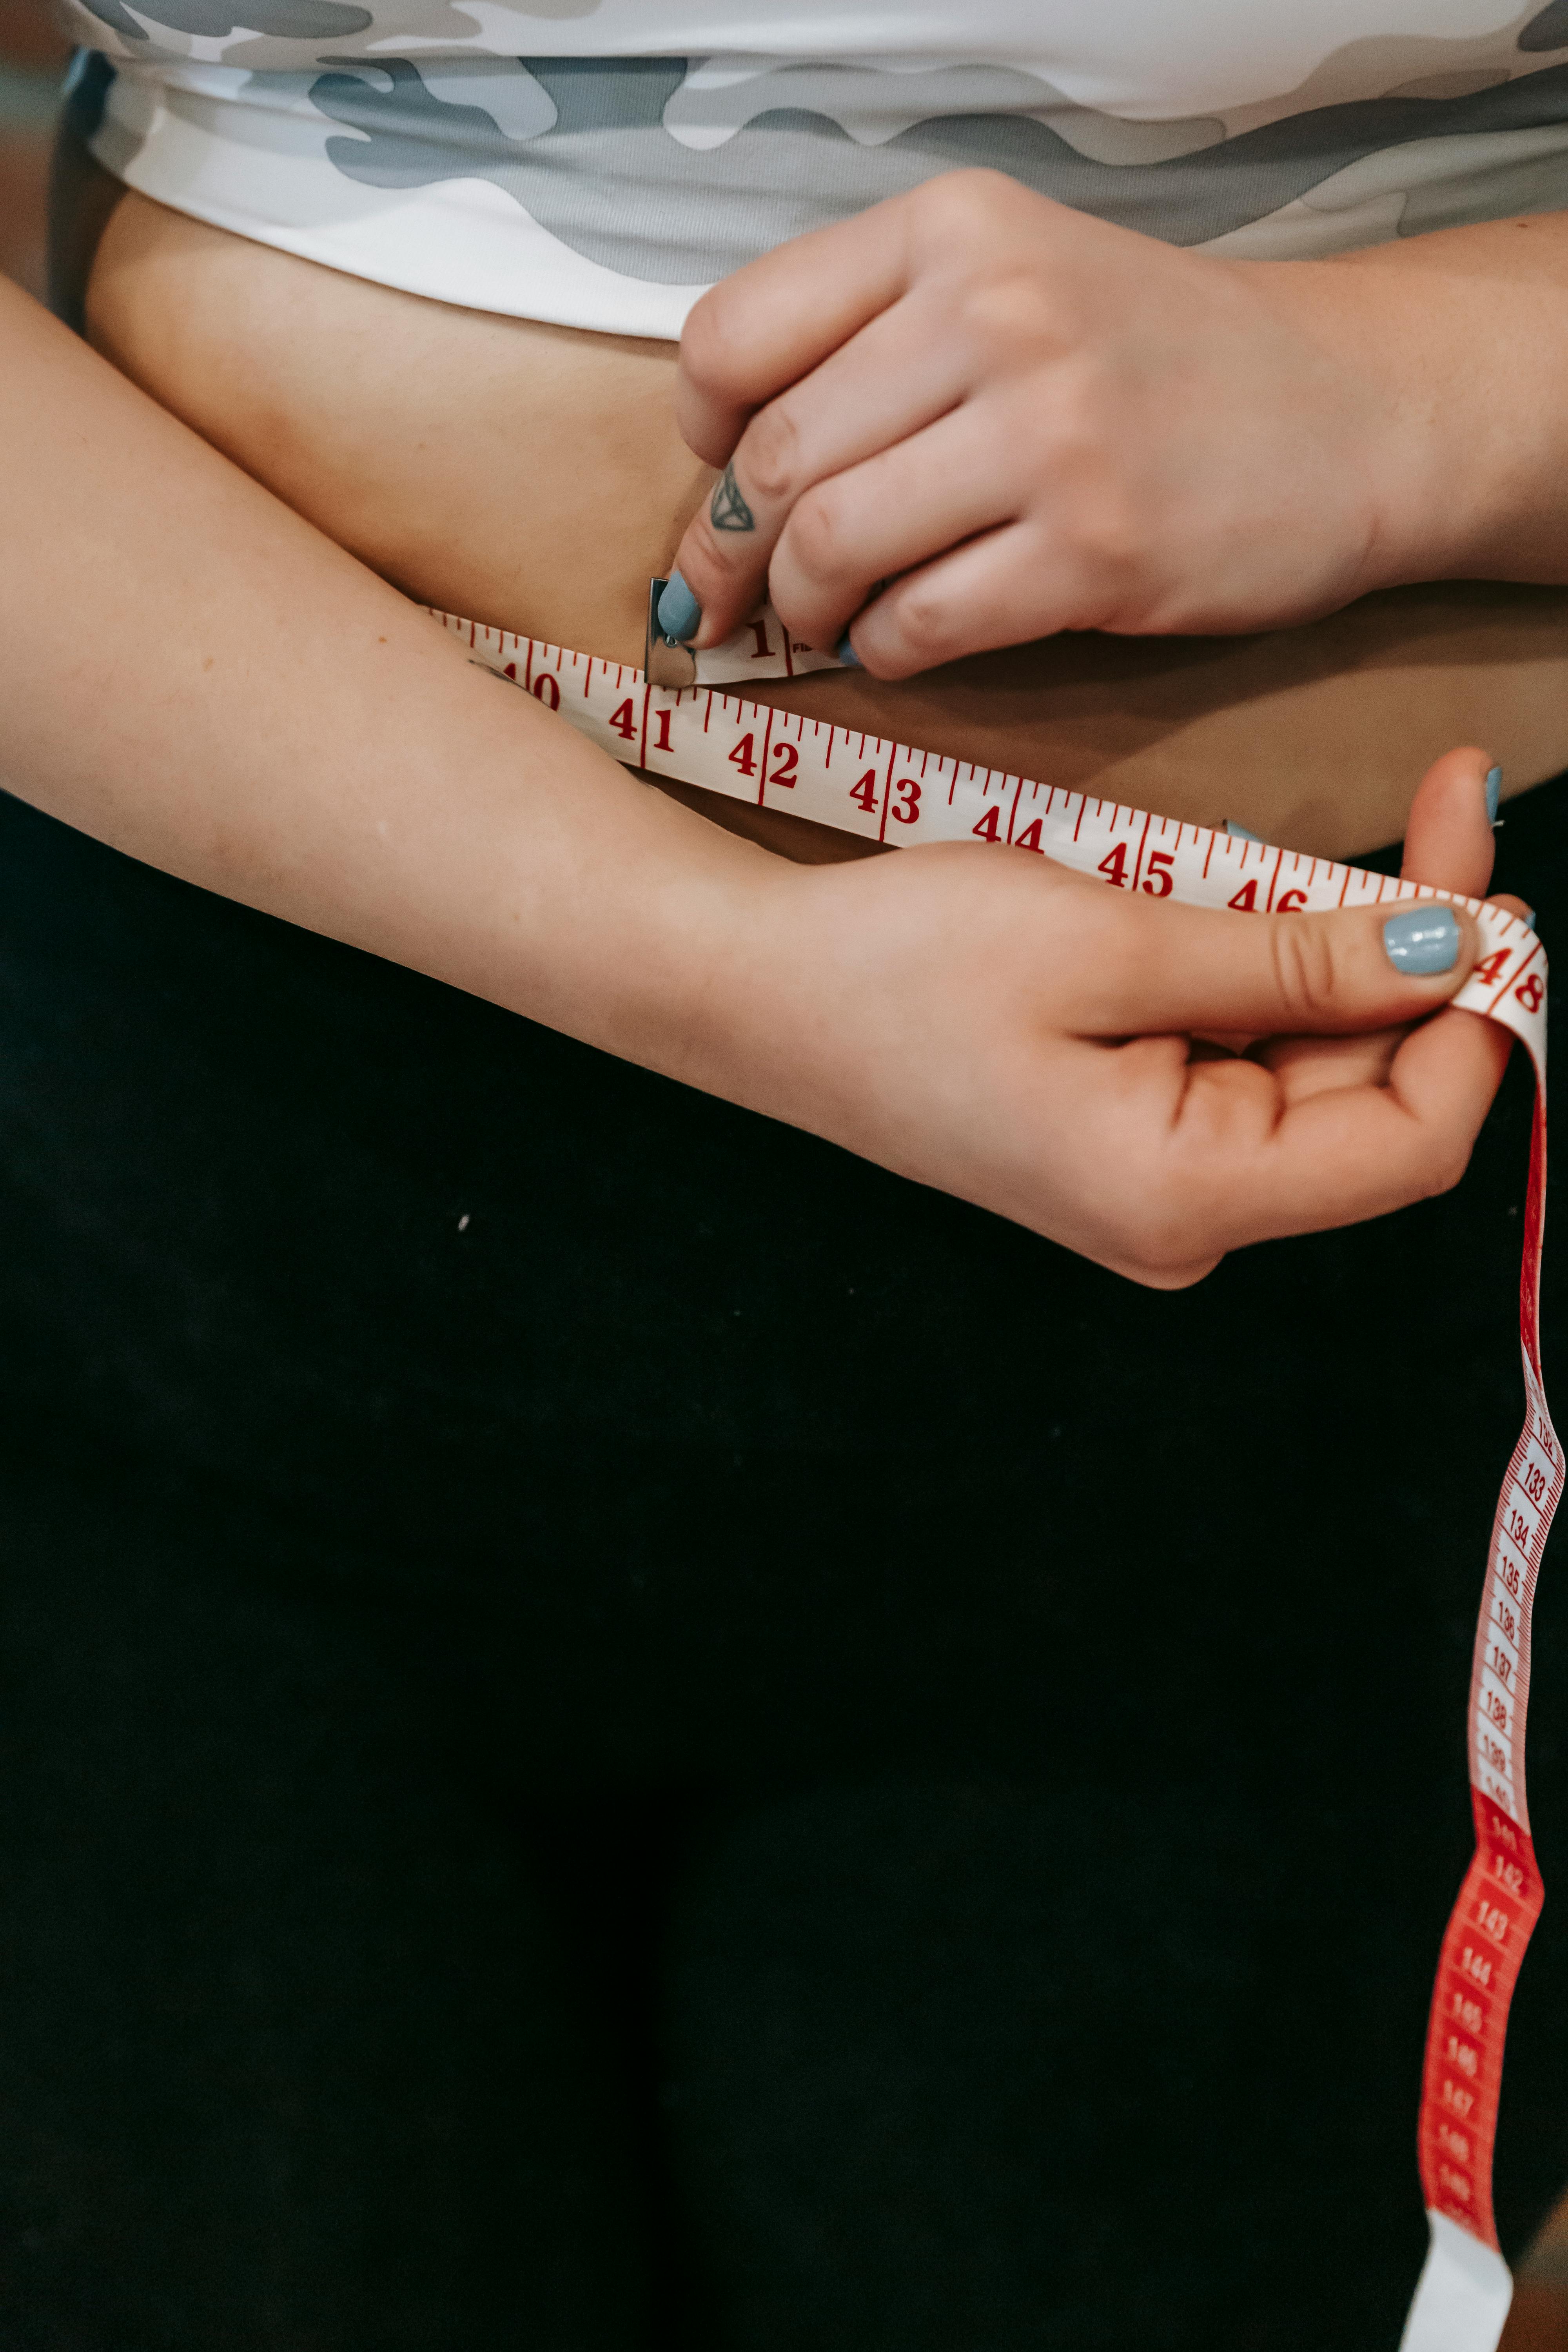 woman checking waist size with measuring tape